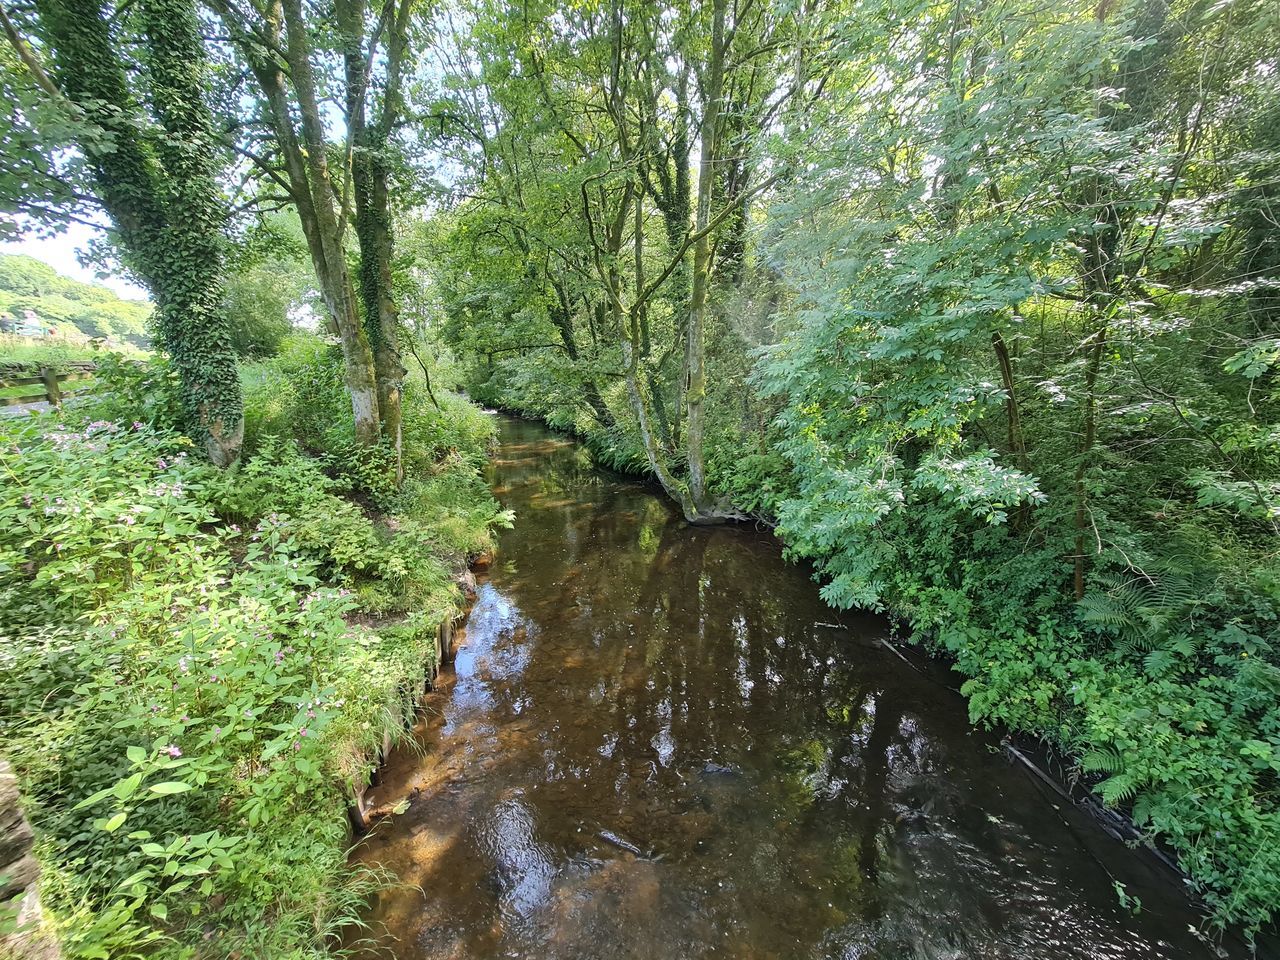 VIEW OF STREAM FLOWING THROUGH FOREST